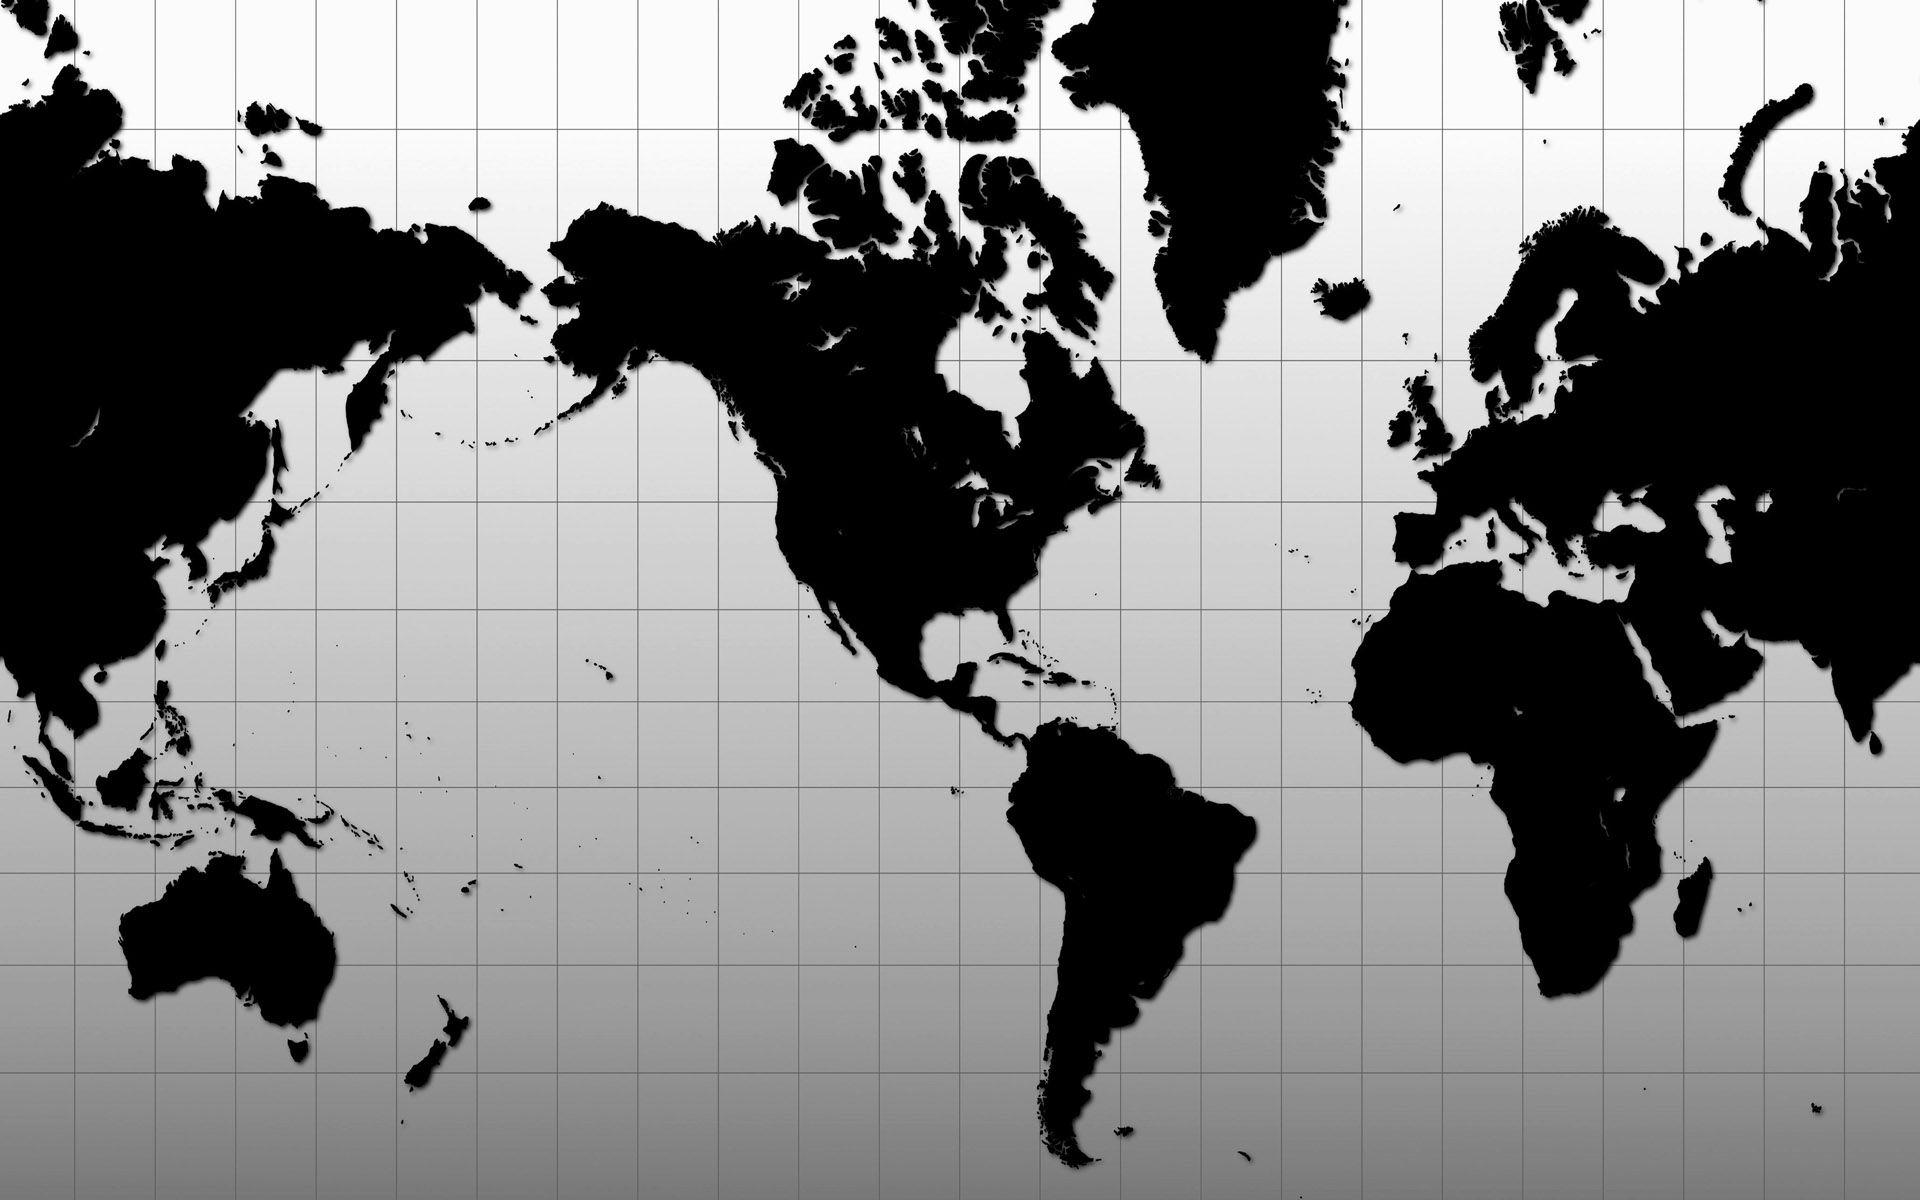 network lines lighting up world map 4k black and white version very detailed can be used as a high resolution texture or projection map stock video c chromadreamcoat 139209572